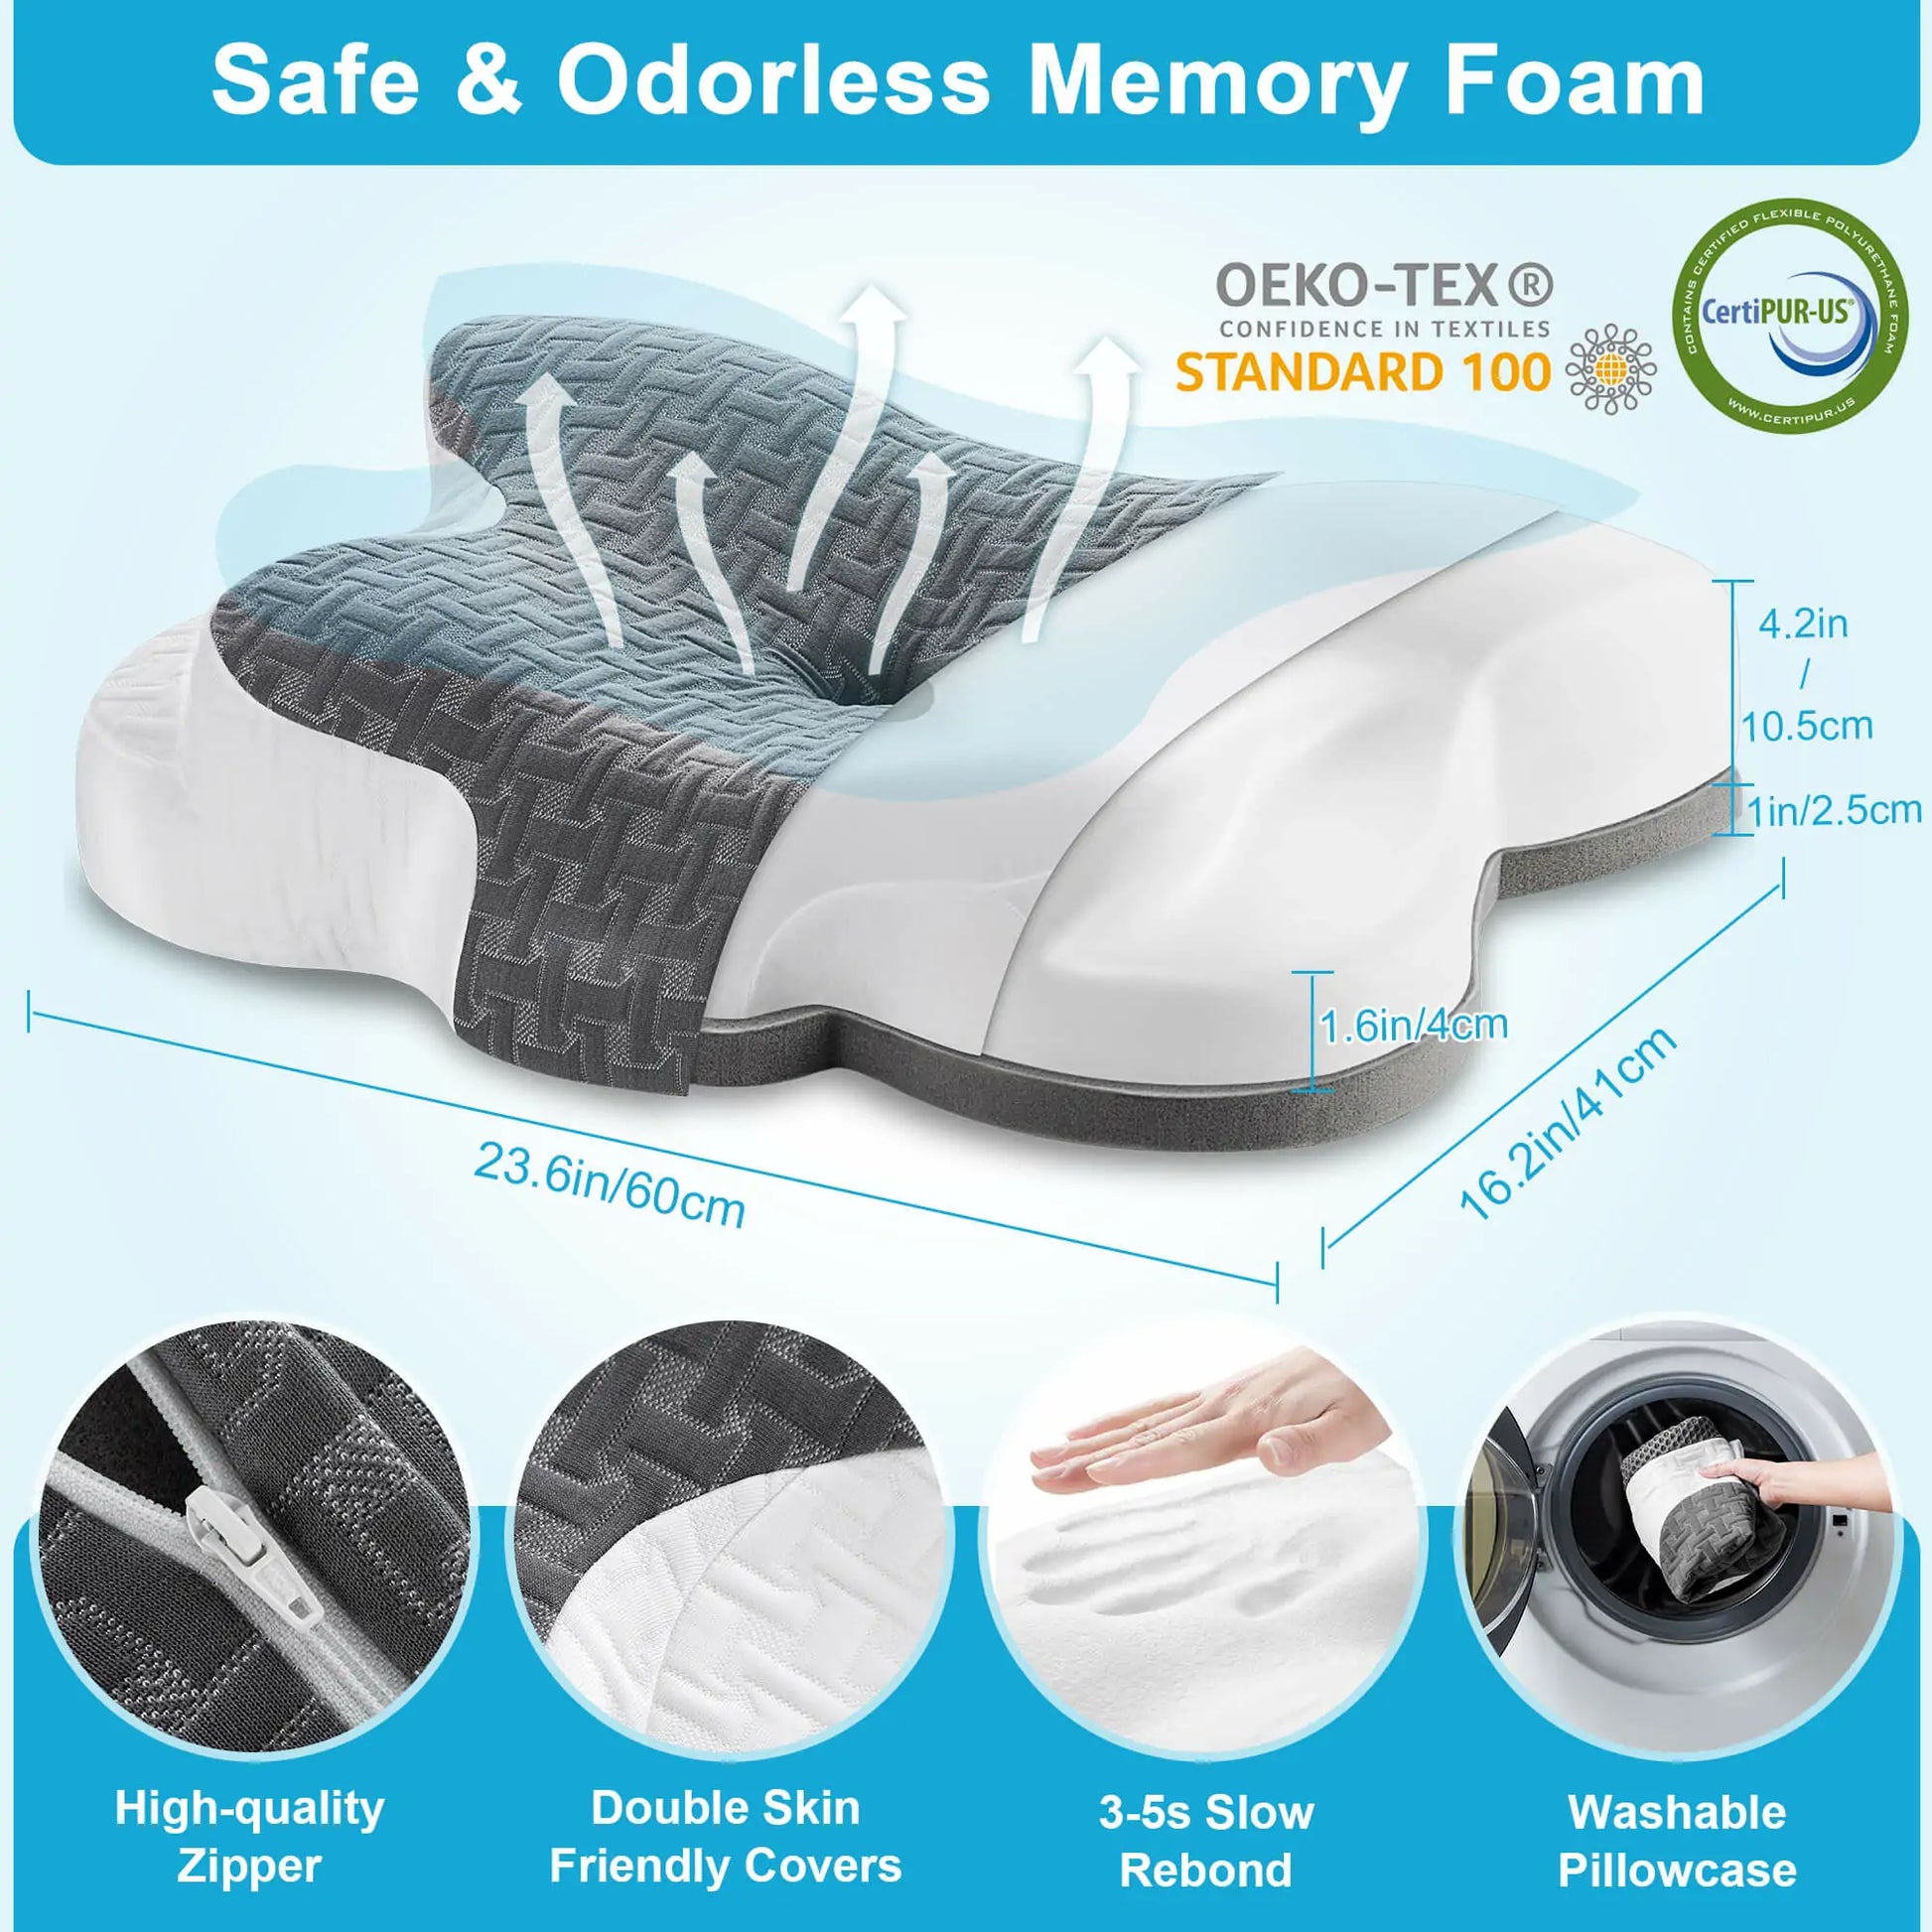 Adjustable Height Cervical Neck Pillow for Pain Relief, Hollow Contour  Pillow with Cooling Breathable Pillowcase, Odorless Memory Foam Pillows